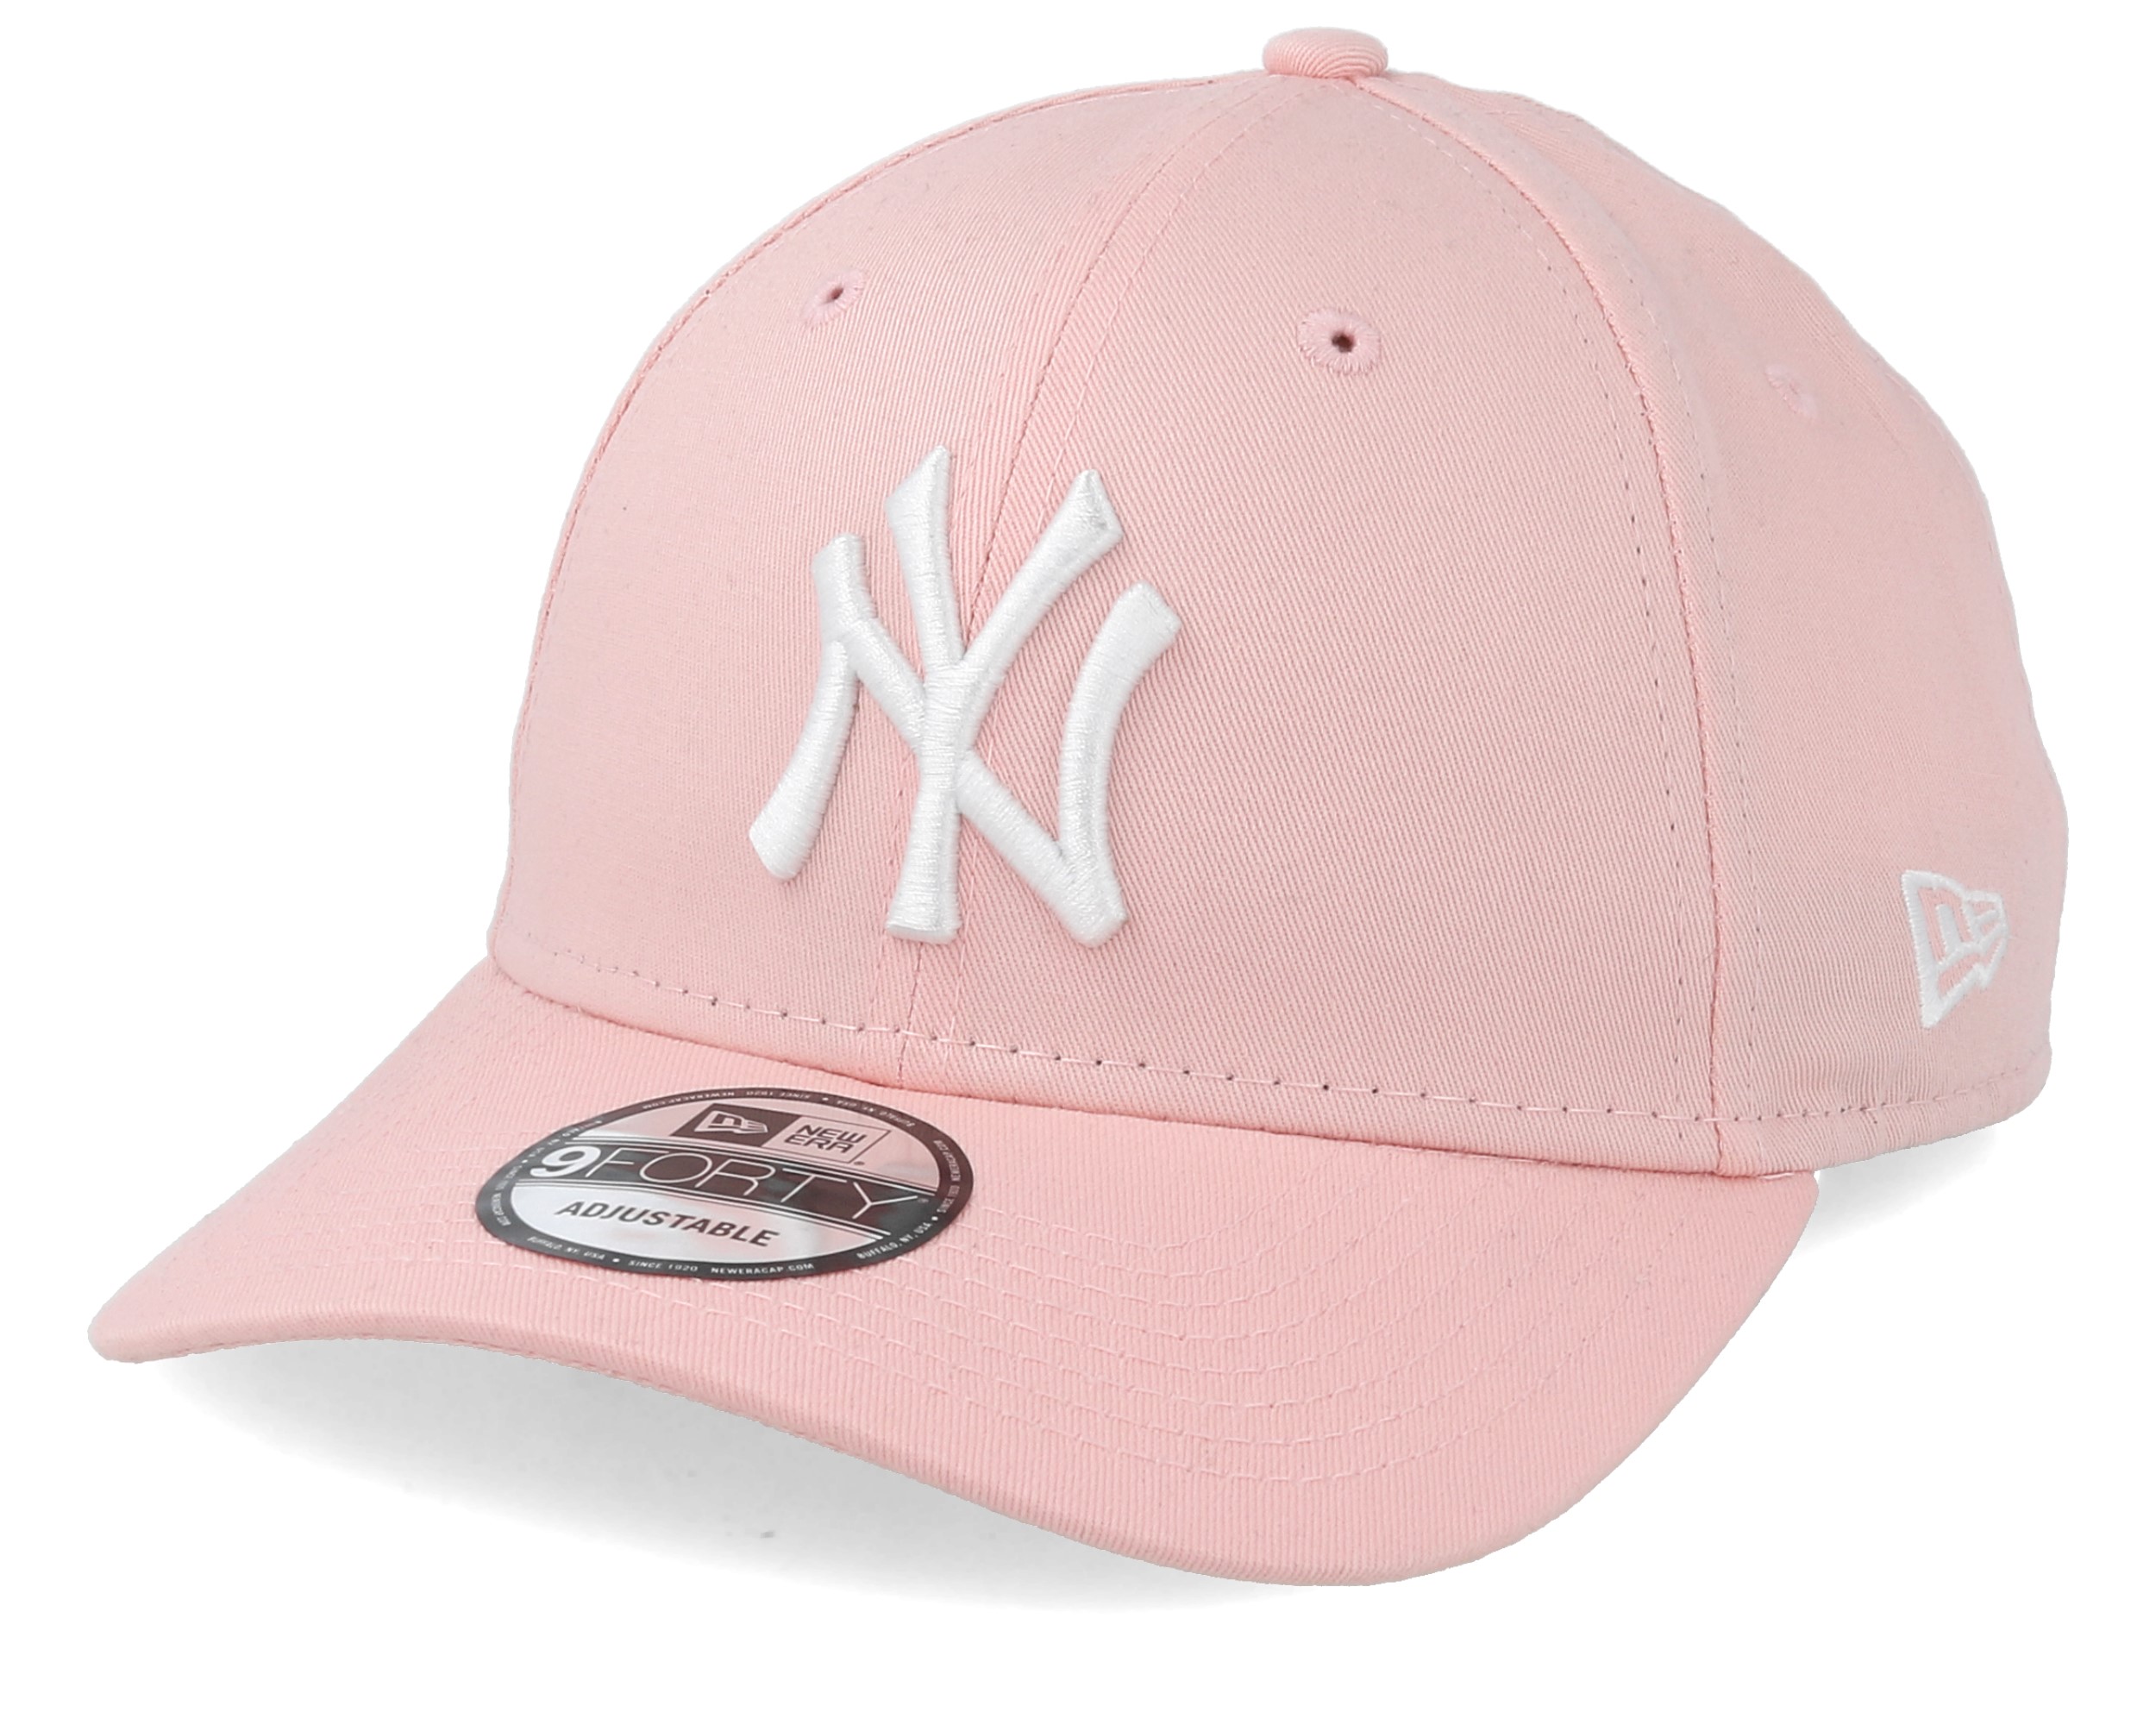 New Era 9FIFTY Low Profile Sunbleach Unstructured Pink Adjustable Baseball Hat 